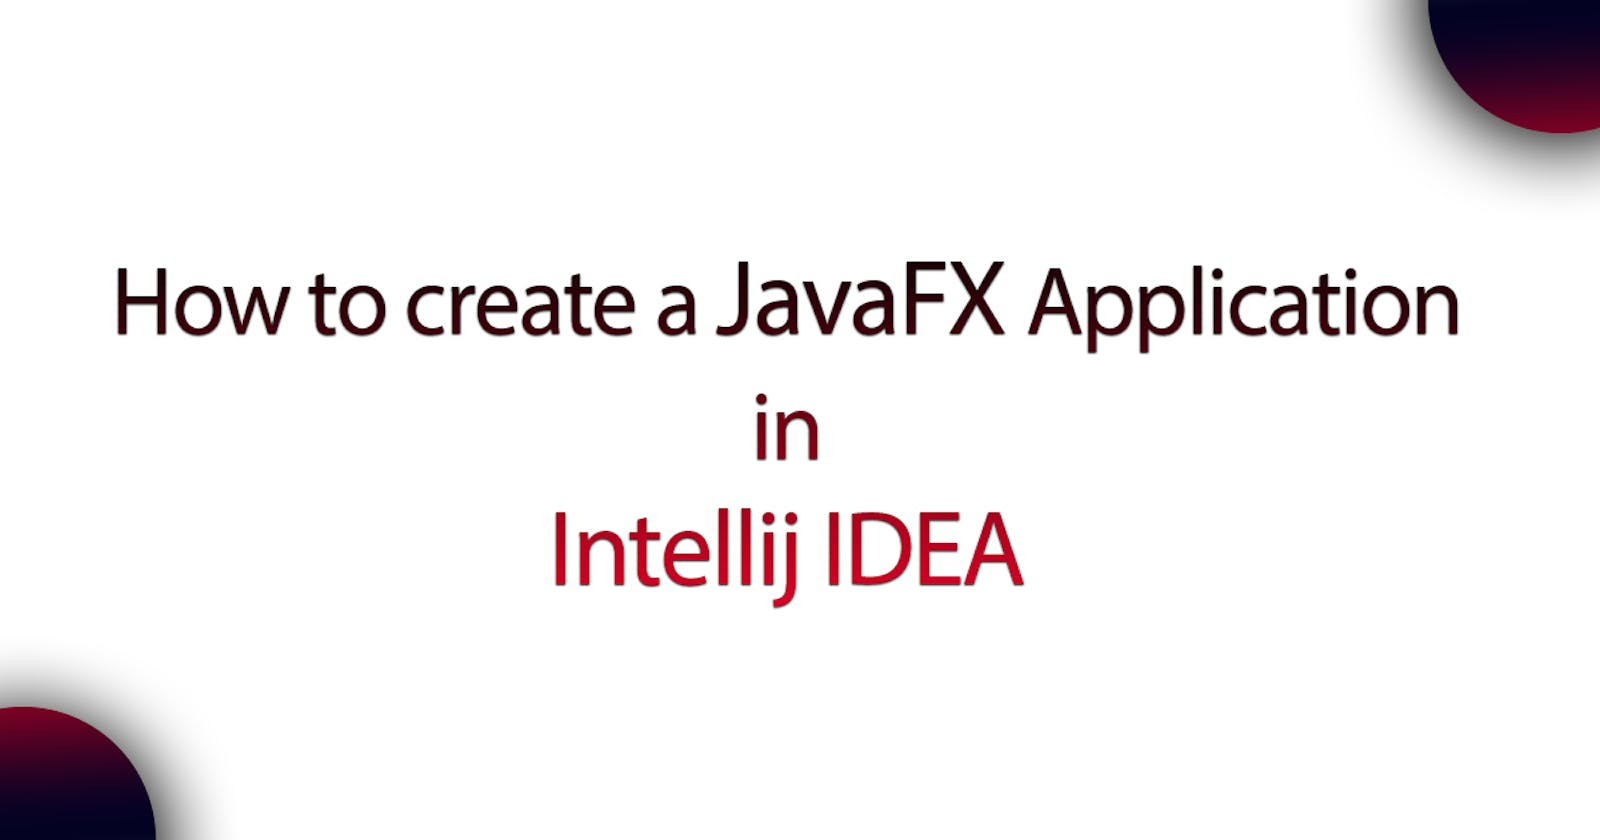 How to create a simple JavaFX Application in Intellij IDEA